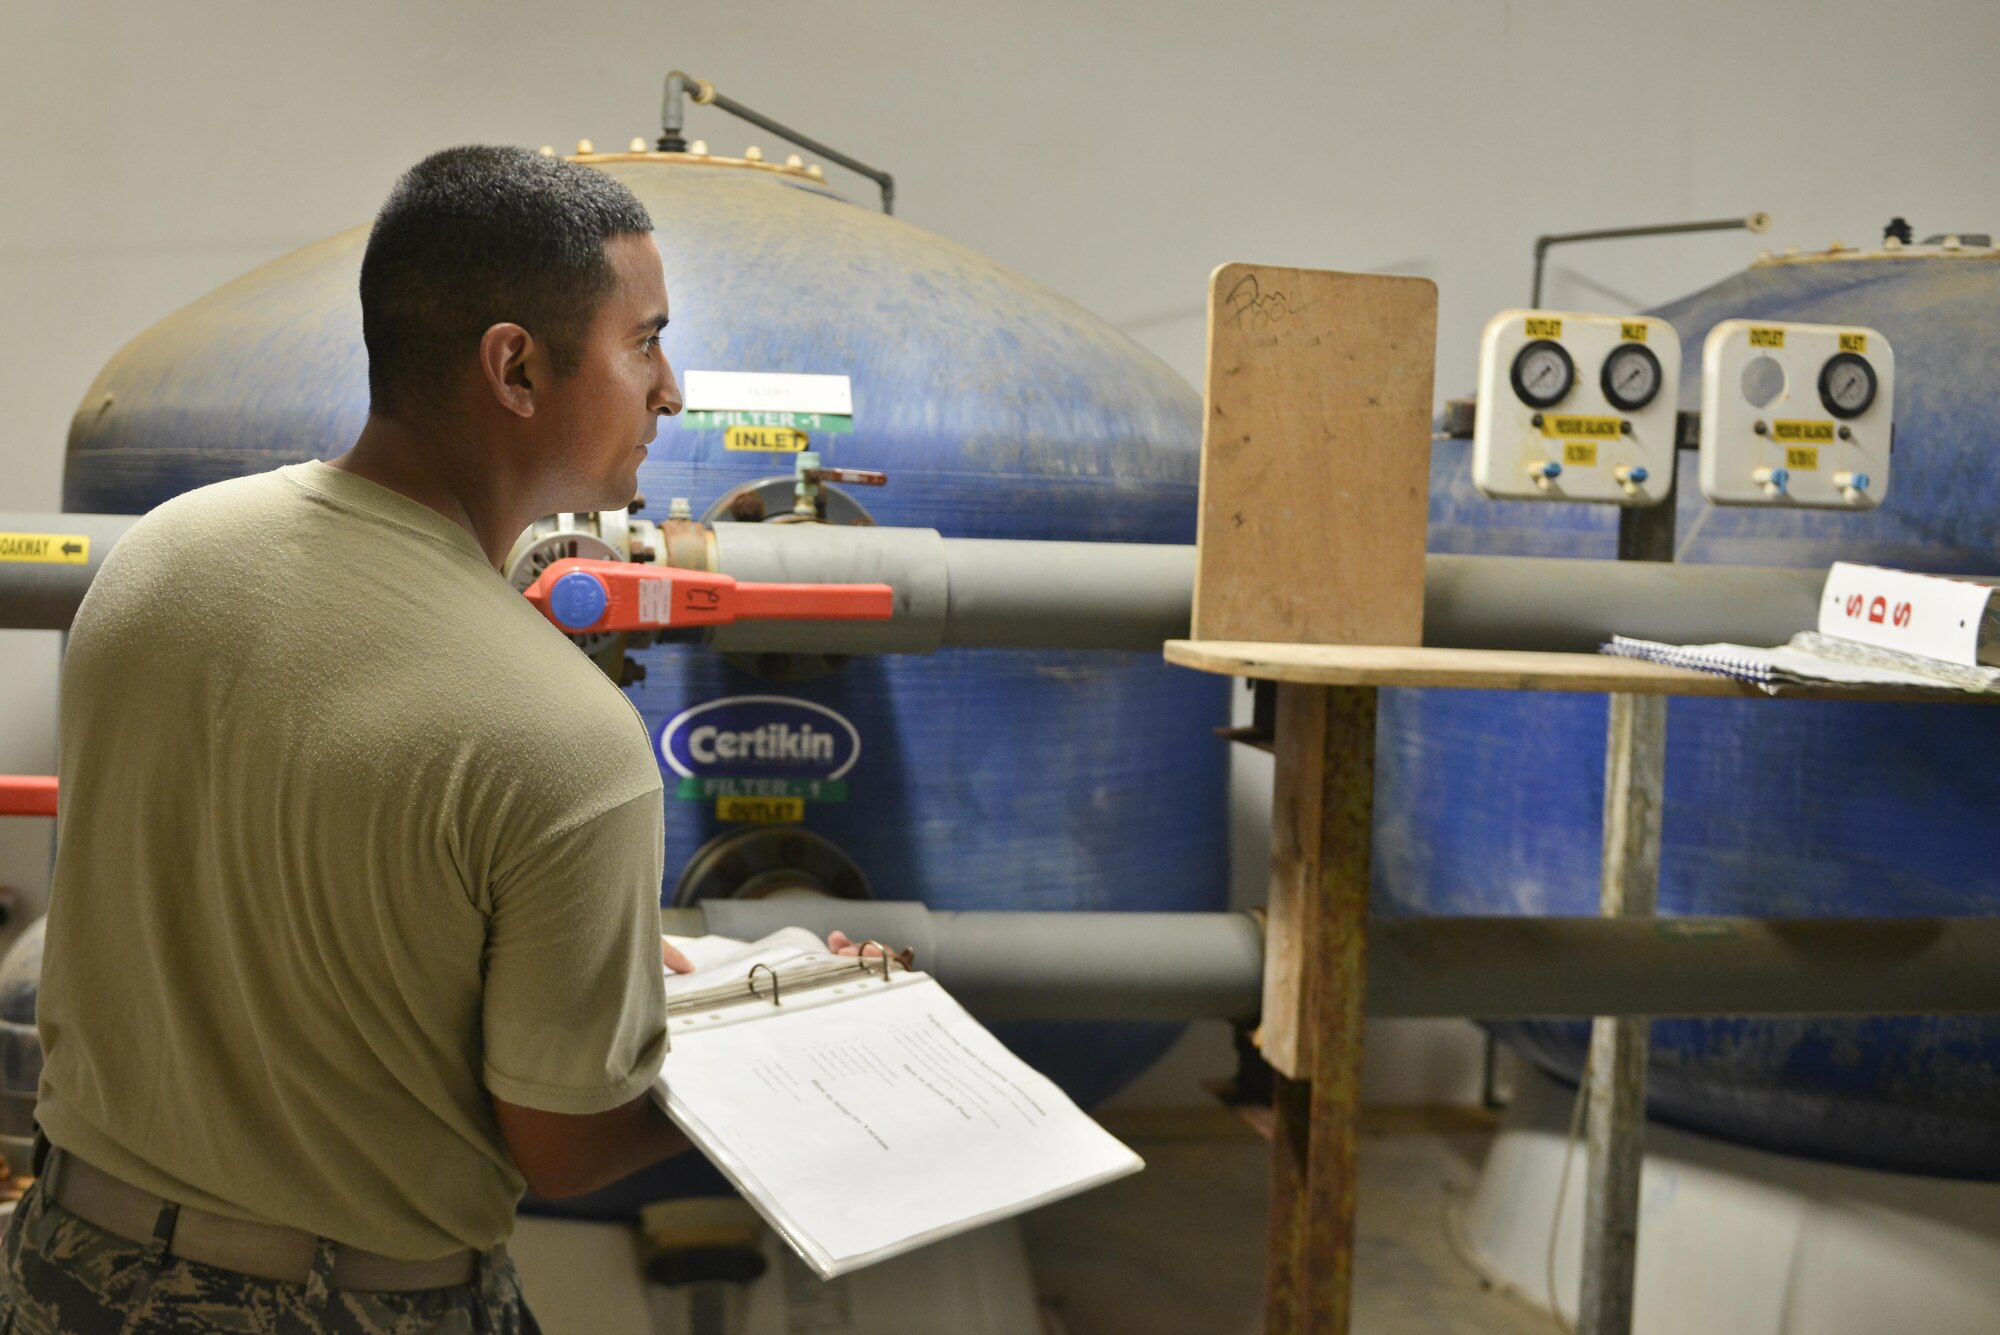 Staff Sgt. Daniel Hernandez, 379th Expeditionary Civil Engineer Squadron water and fuels, goes through a step-by-step checklist to properly flush the water filtration system for a pool August 14, 2015 at Al Udeid Air Base, Qatar.  With the high number of deployed members here at Al Udeid, the 379th ECES water and fuels airmen stay busy day and night keeping the systems running to support the base. (U.S. Air Force photo/ Staff Sgt. Alexandre Montes)